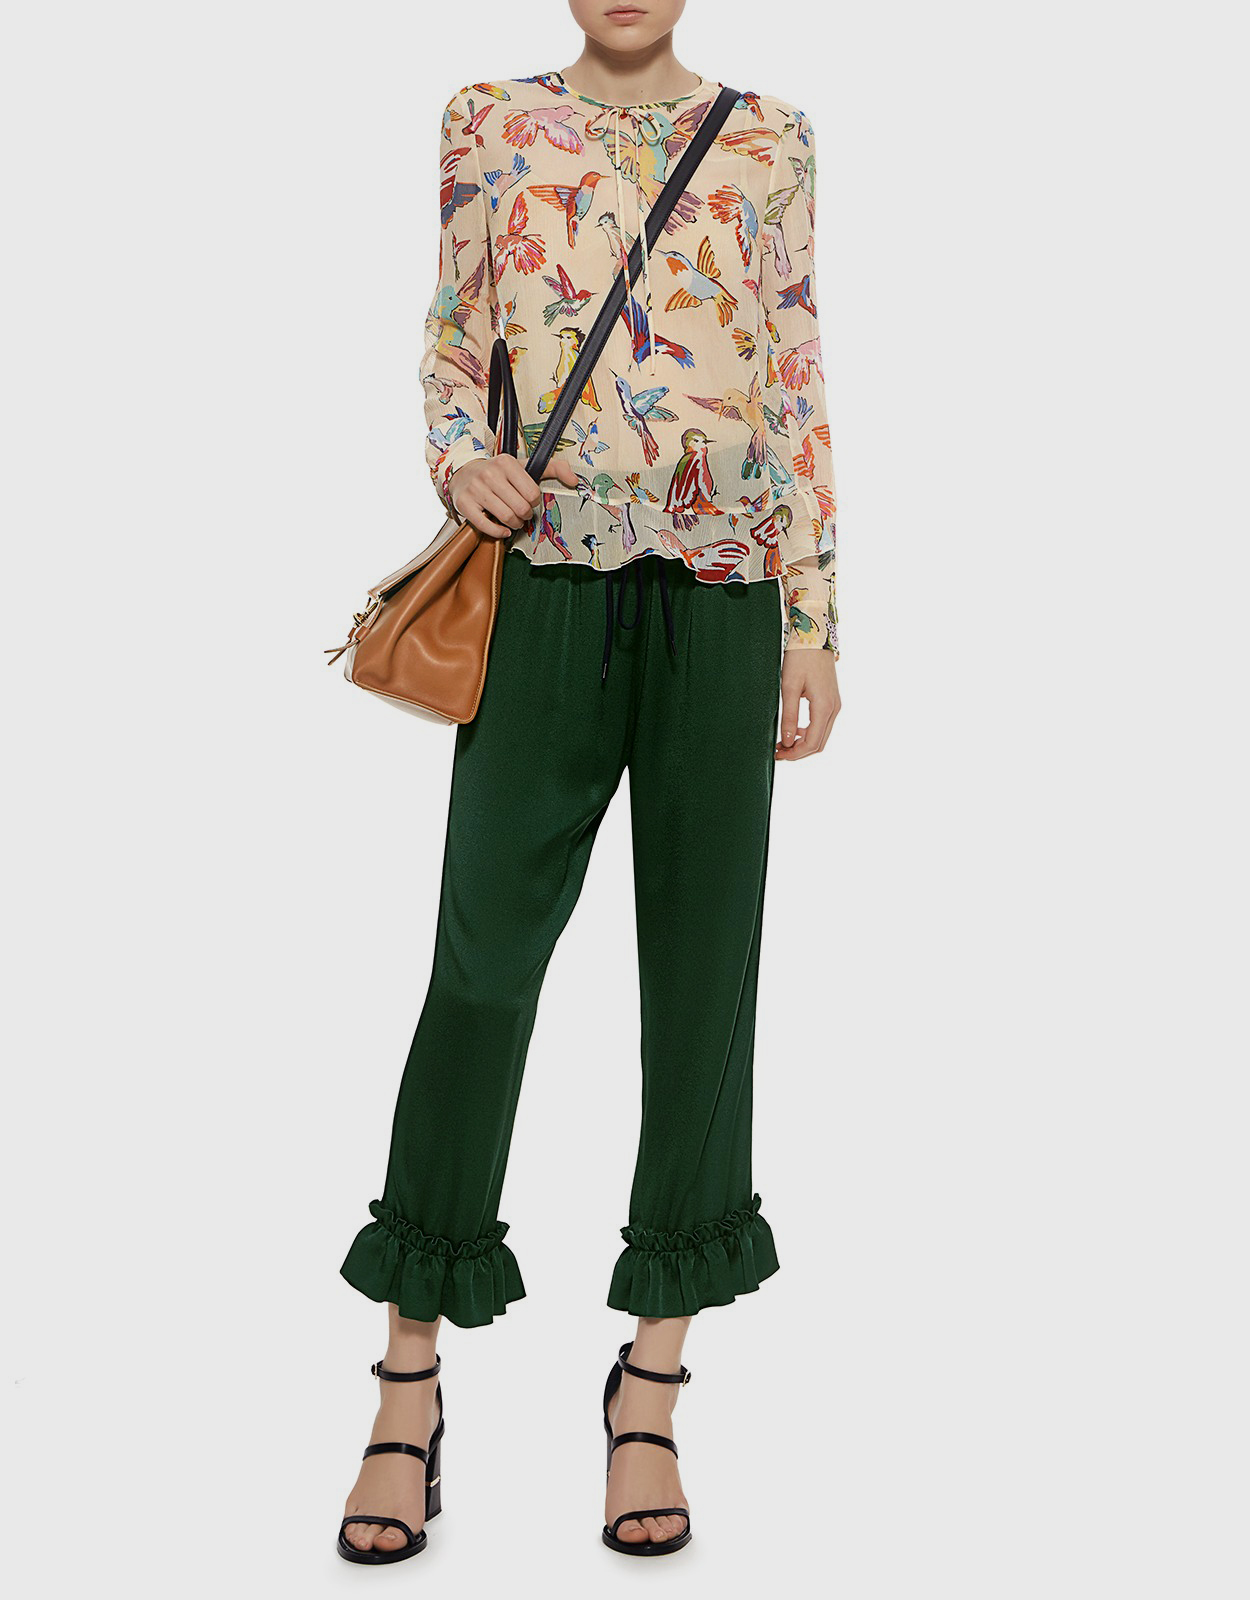 REDValentino Silk Top With Flowers And Stripes Print - Shirt for Women